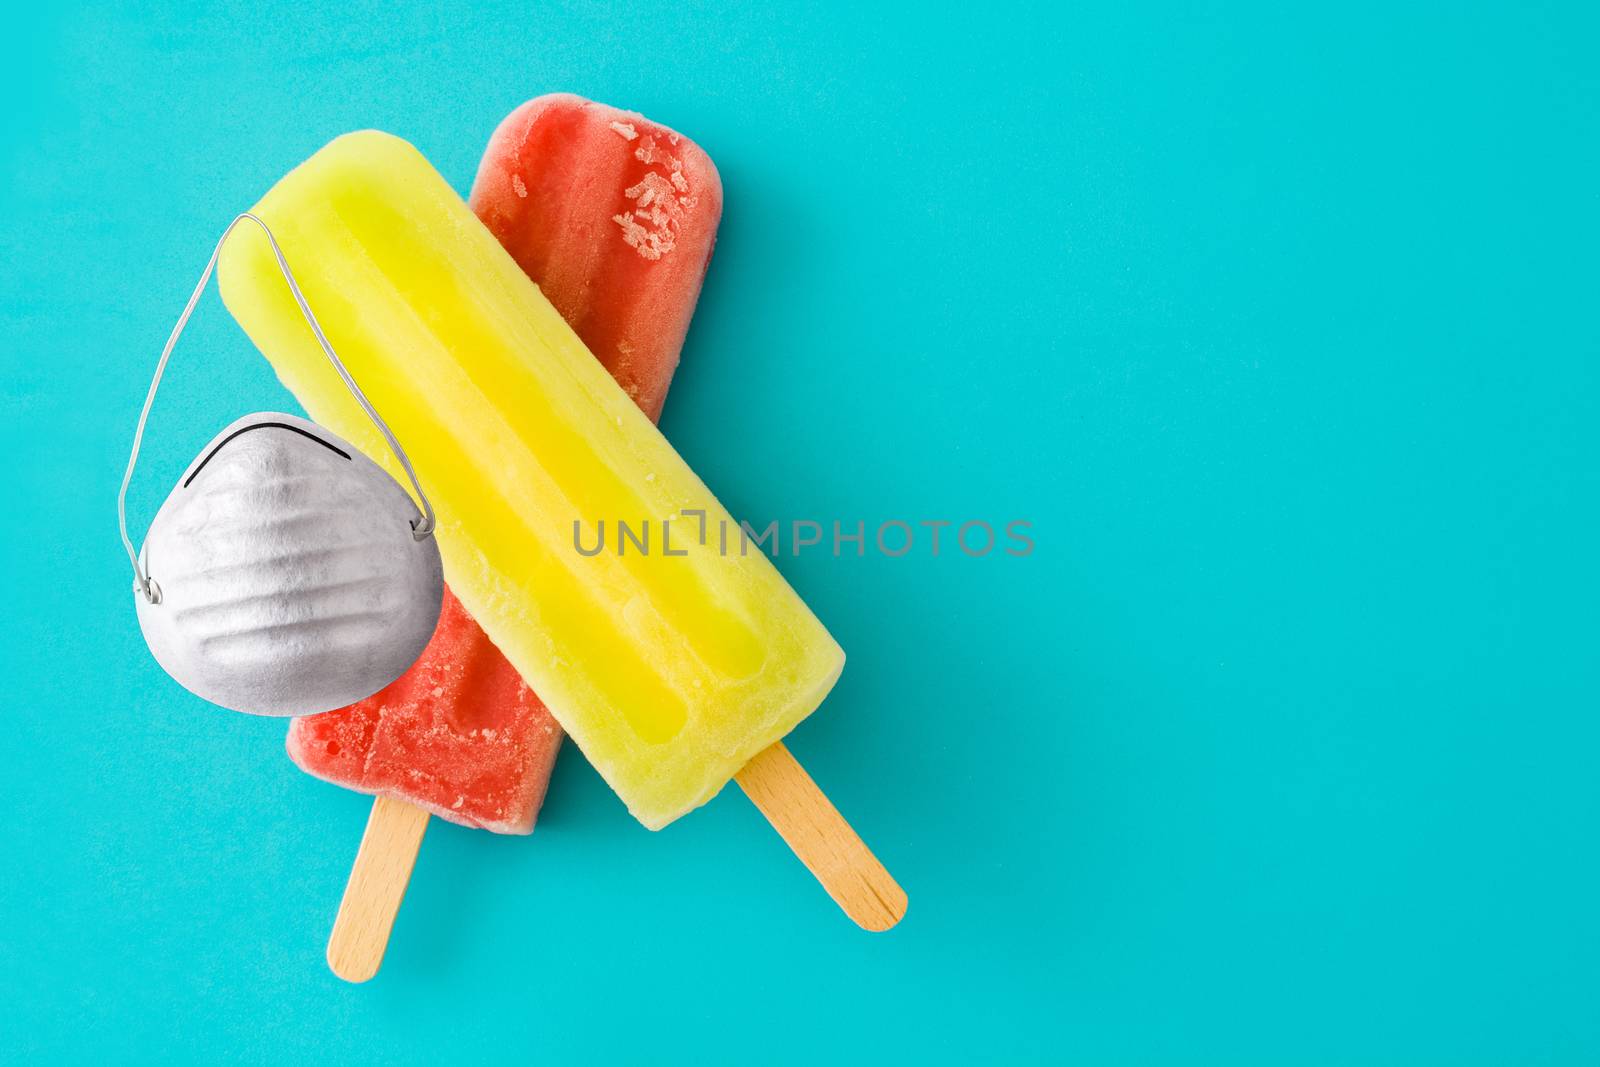 Lemon and strawberry popsicles with protective face mask by chandlervid85